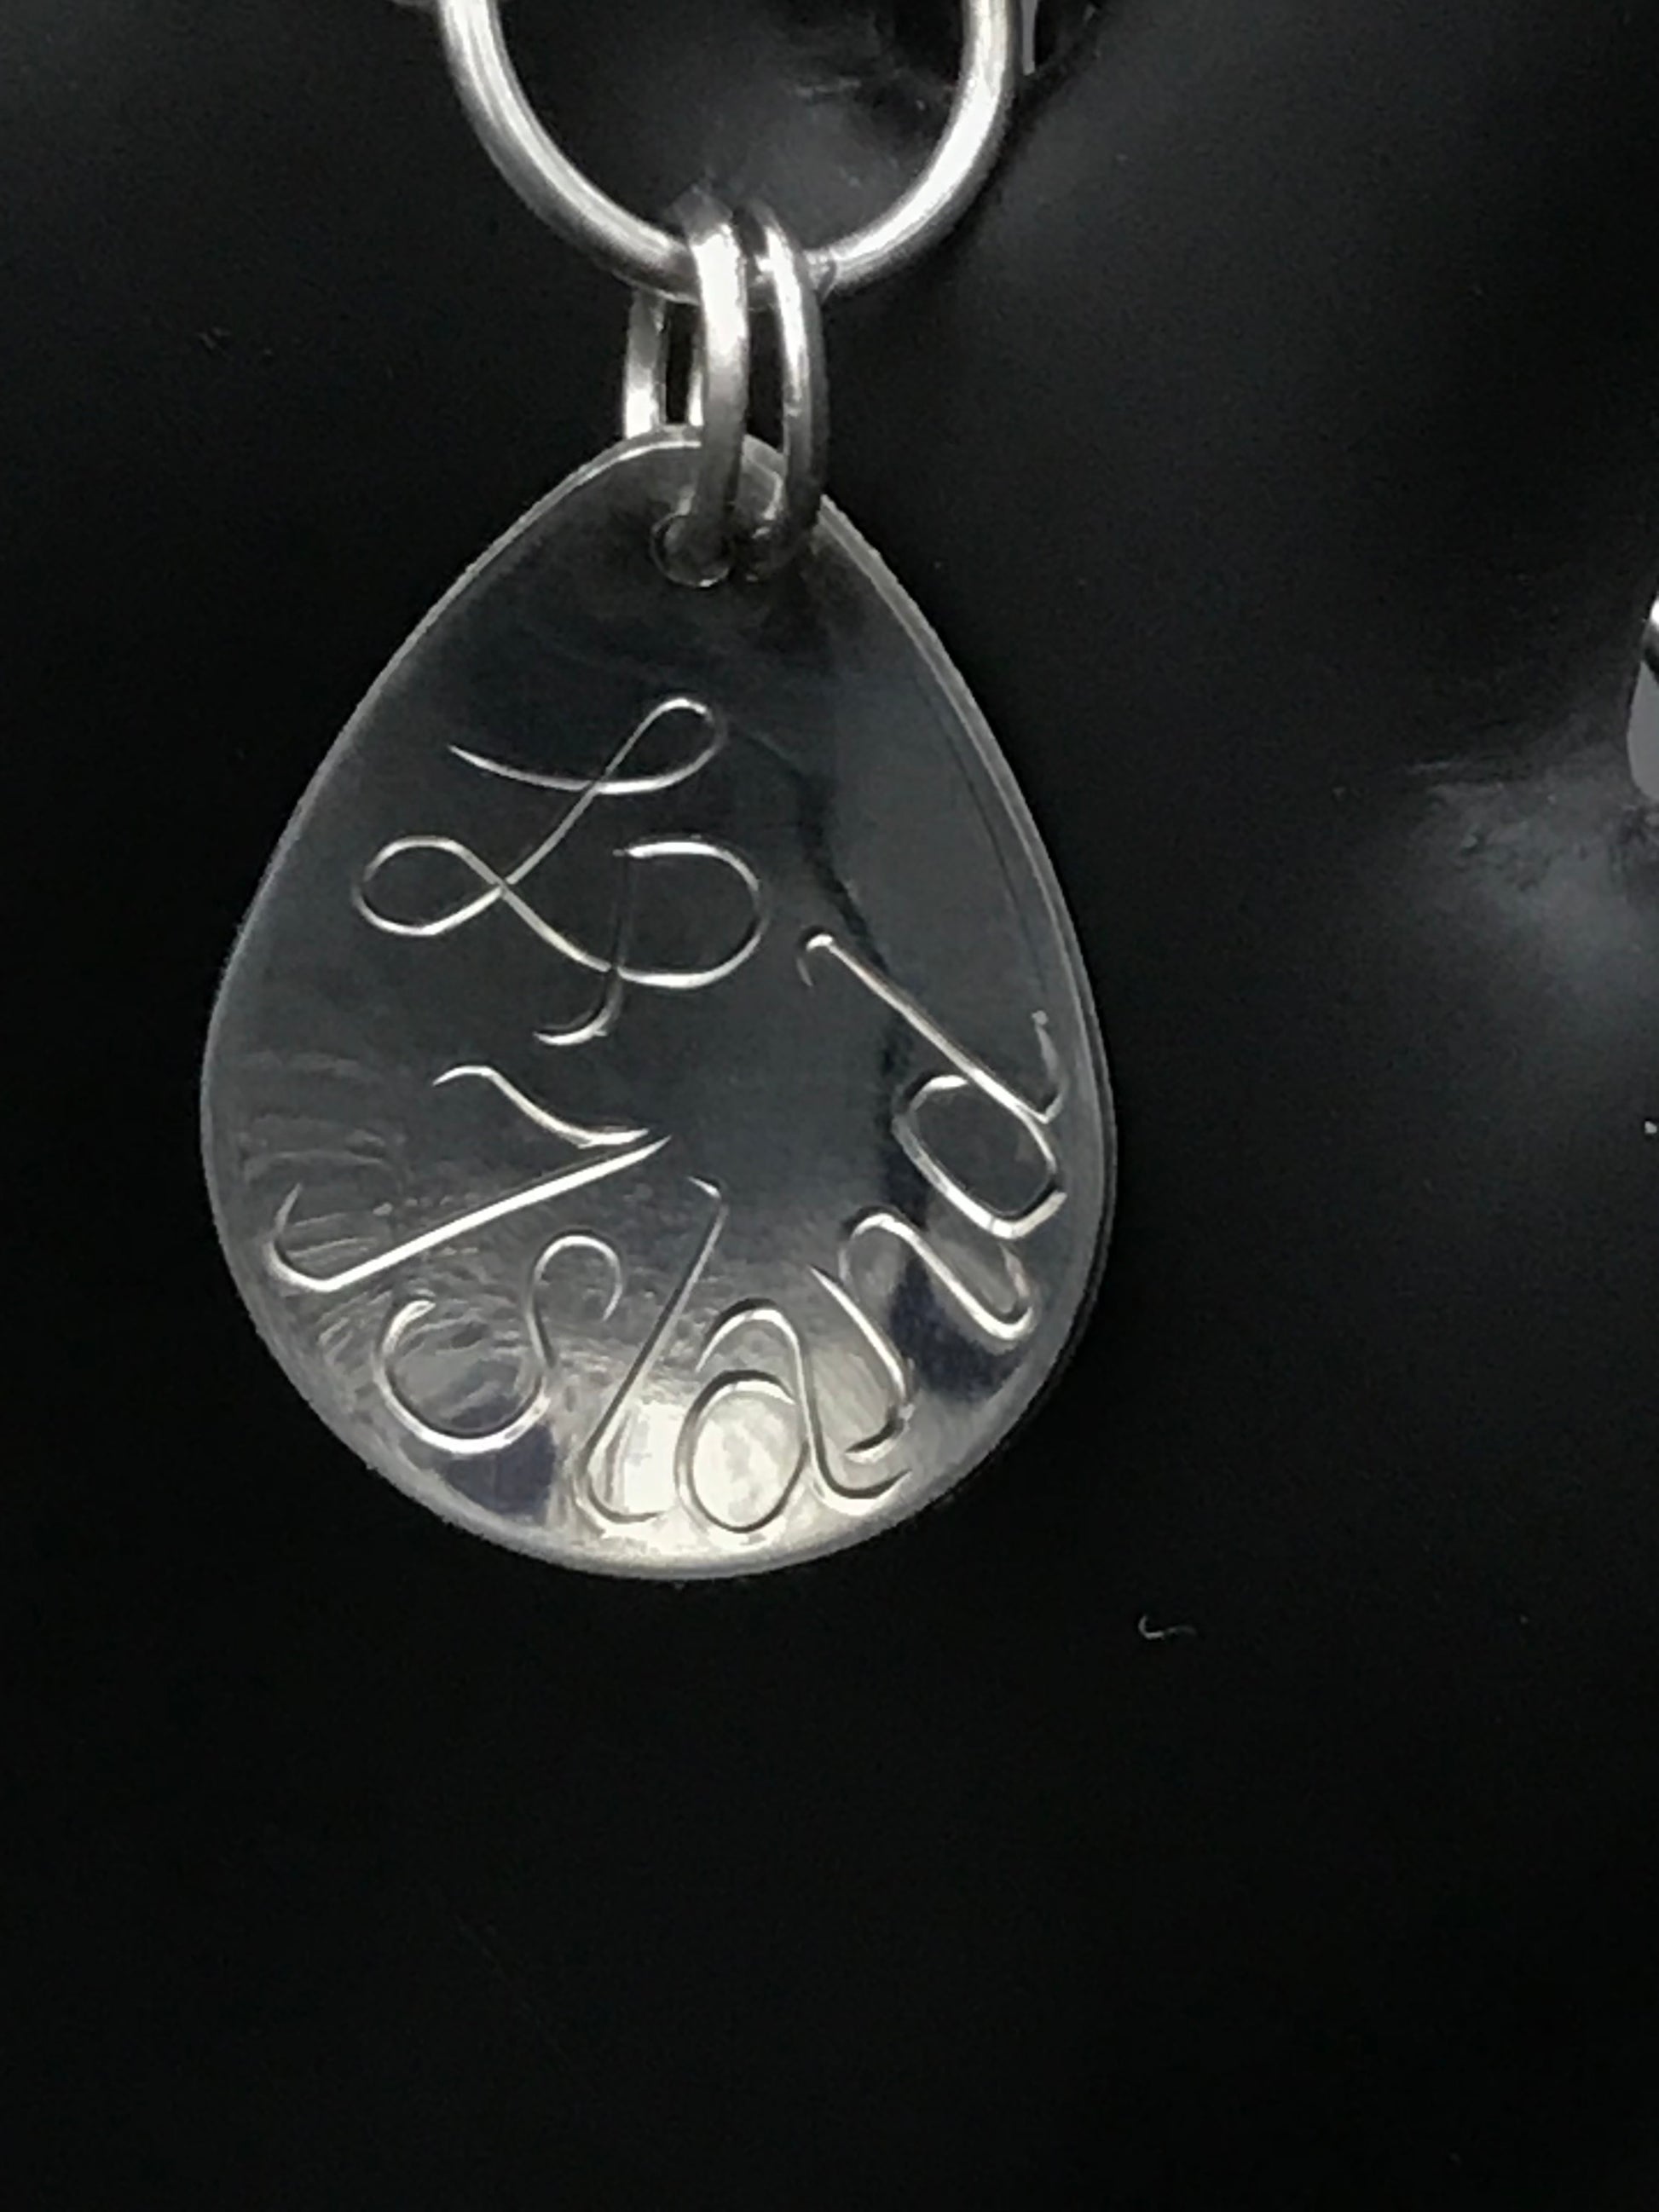 Back of charm with artist initial and Island engraved